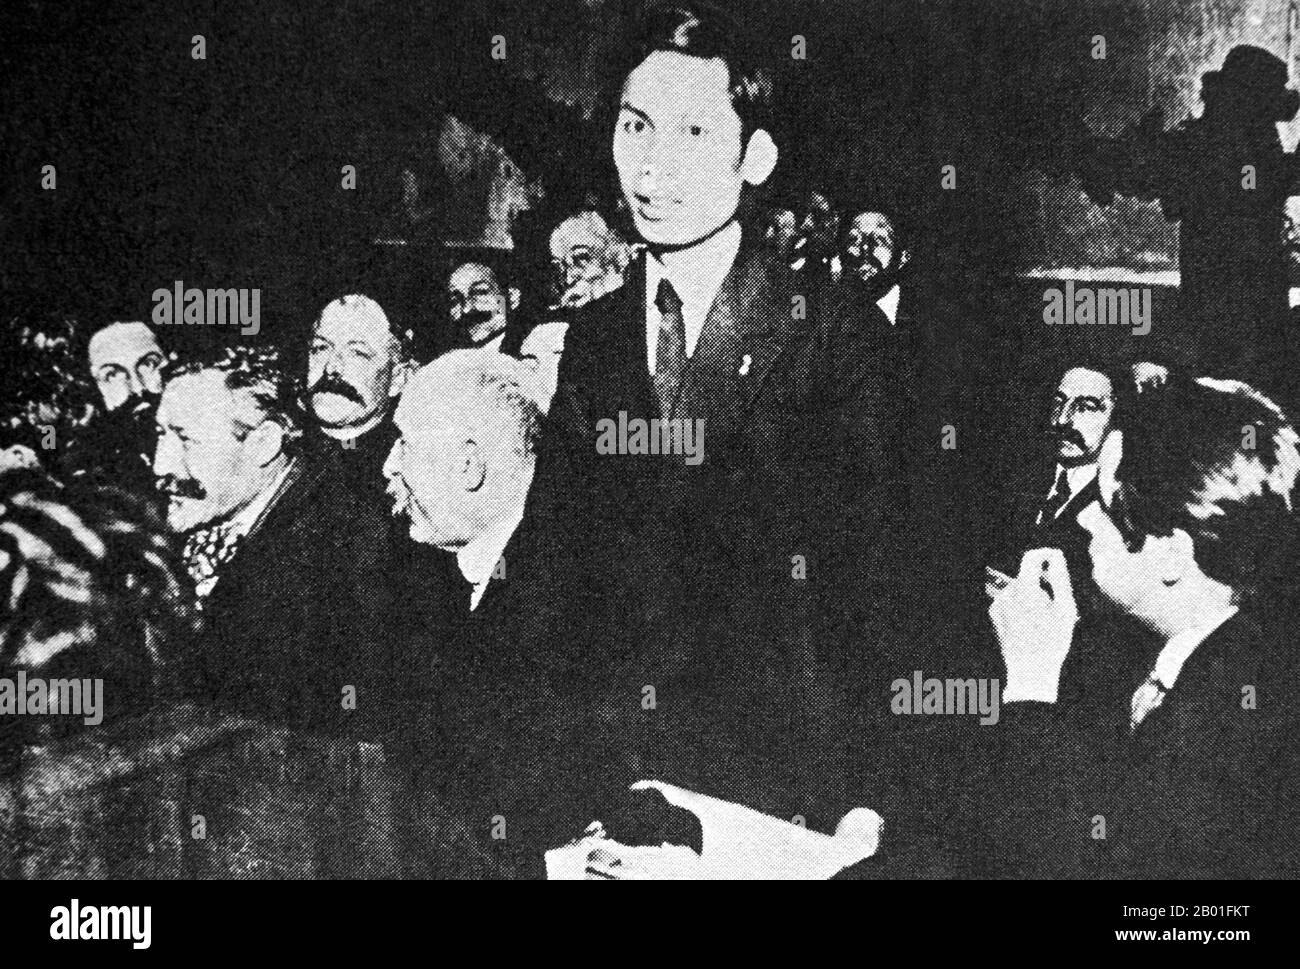 Vietnam/France: A young Ho Chi Minh (19 May 1890 - 3 September 1969) at the French Socialist Party Congress, 1920.  Hồ Chí Minh, born Nguyễn Sinh Cung and also known as Nguyễn Ái Quốc was a Vietnamese Communist revolutionary leader who was prime minister (1946-1955) and president (1945-1969) of the Democratic Republic of Vietnam (North Vietnam).  He formed the Democratic Republic of Vietnam in 1945 and led the Viet Cong during the Vietnam War until his death. Hồ led the Viet Minh independence movement from 1941 onward, though lost political power in the late 1950s, remaining as a figurehead. Stock Photo